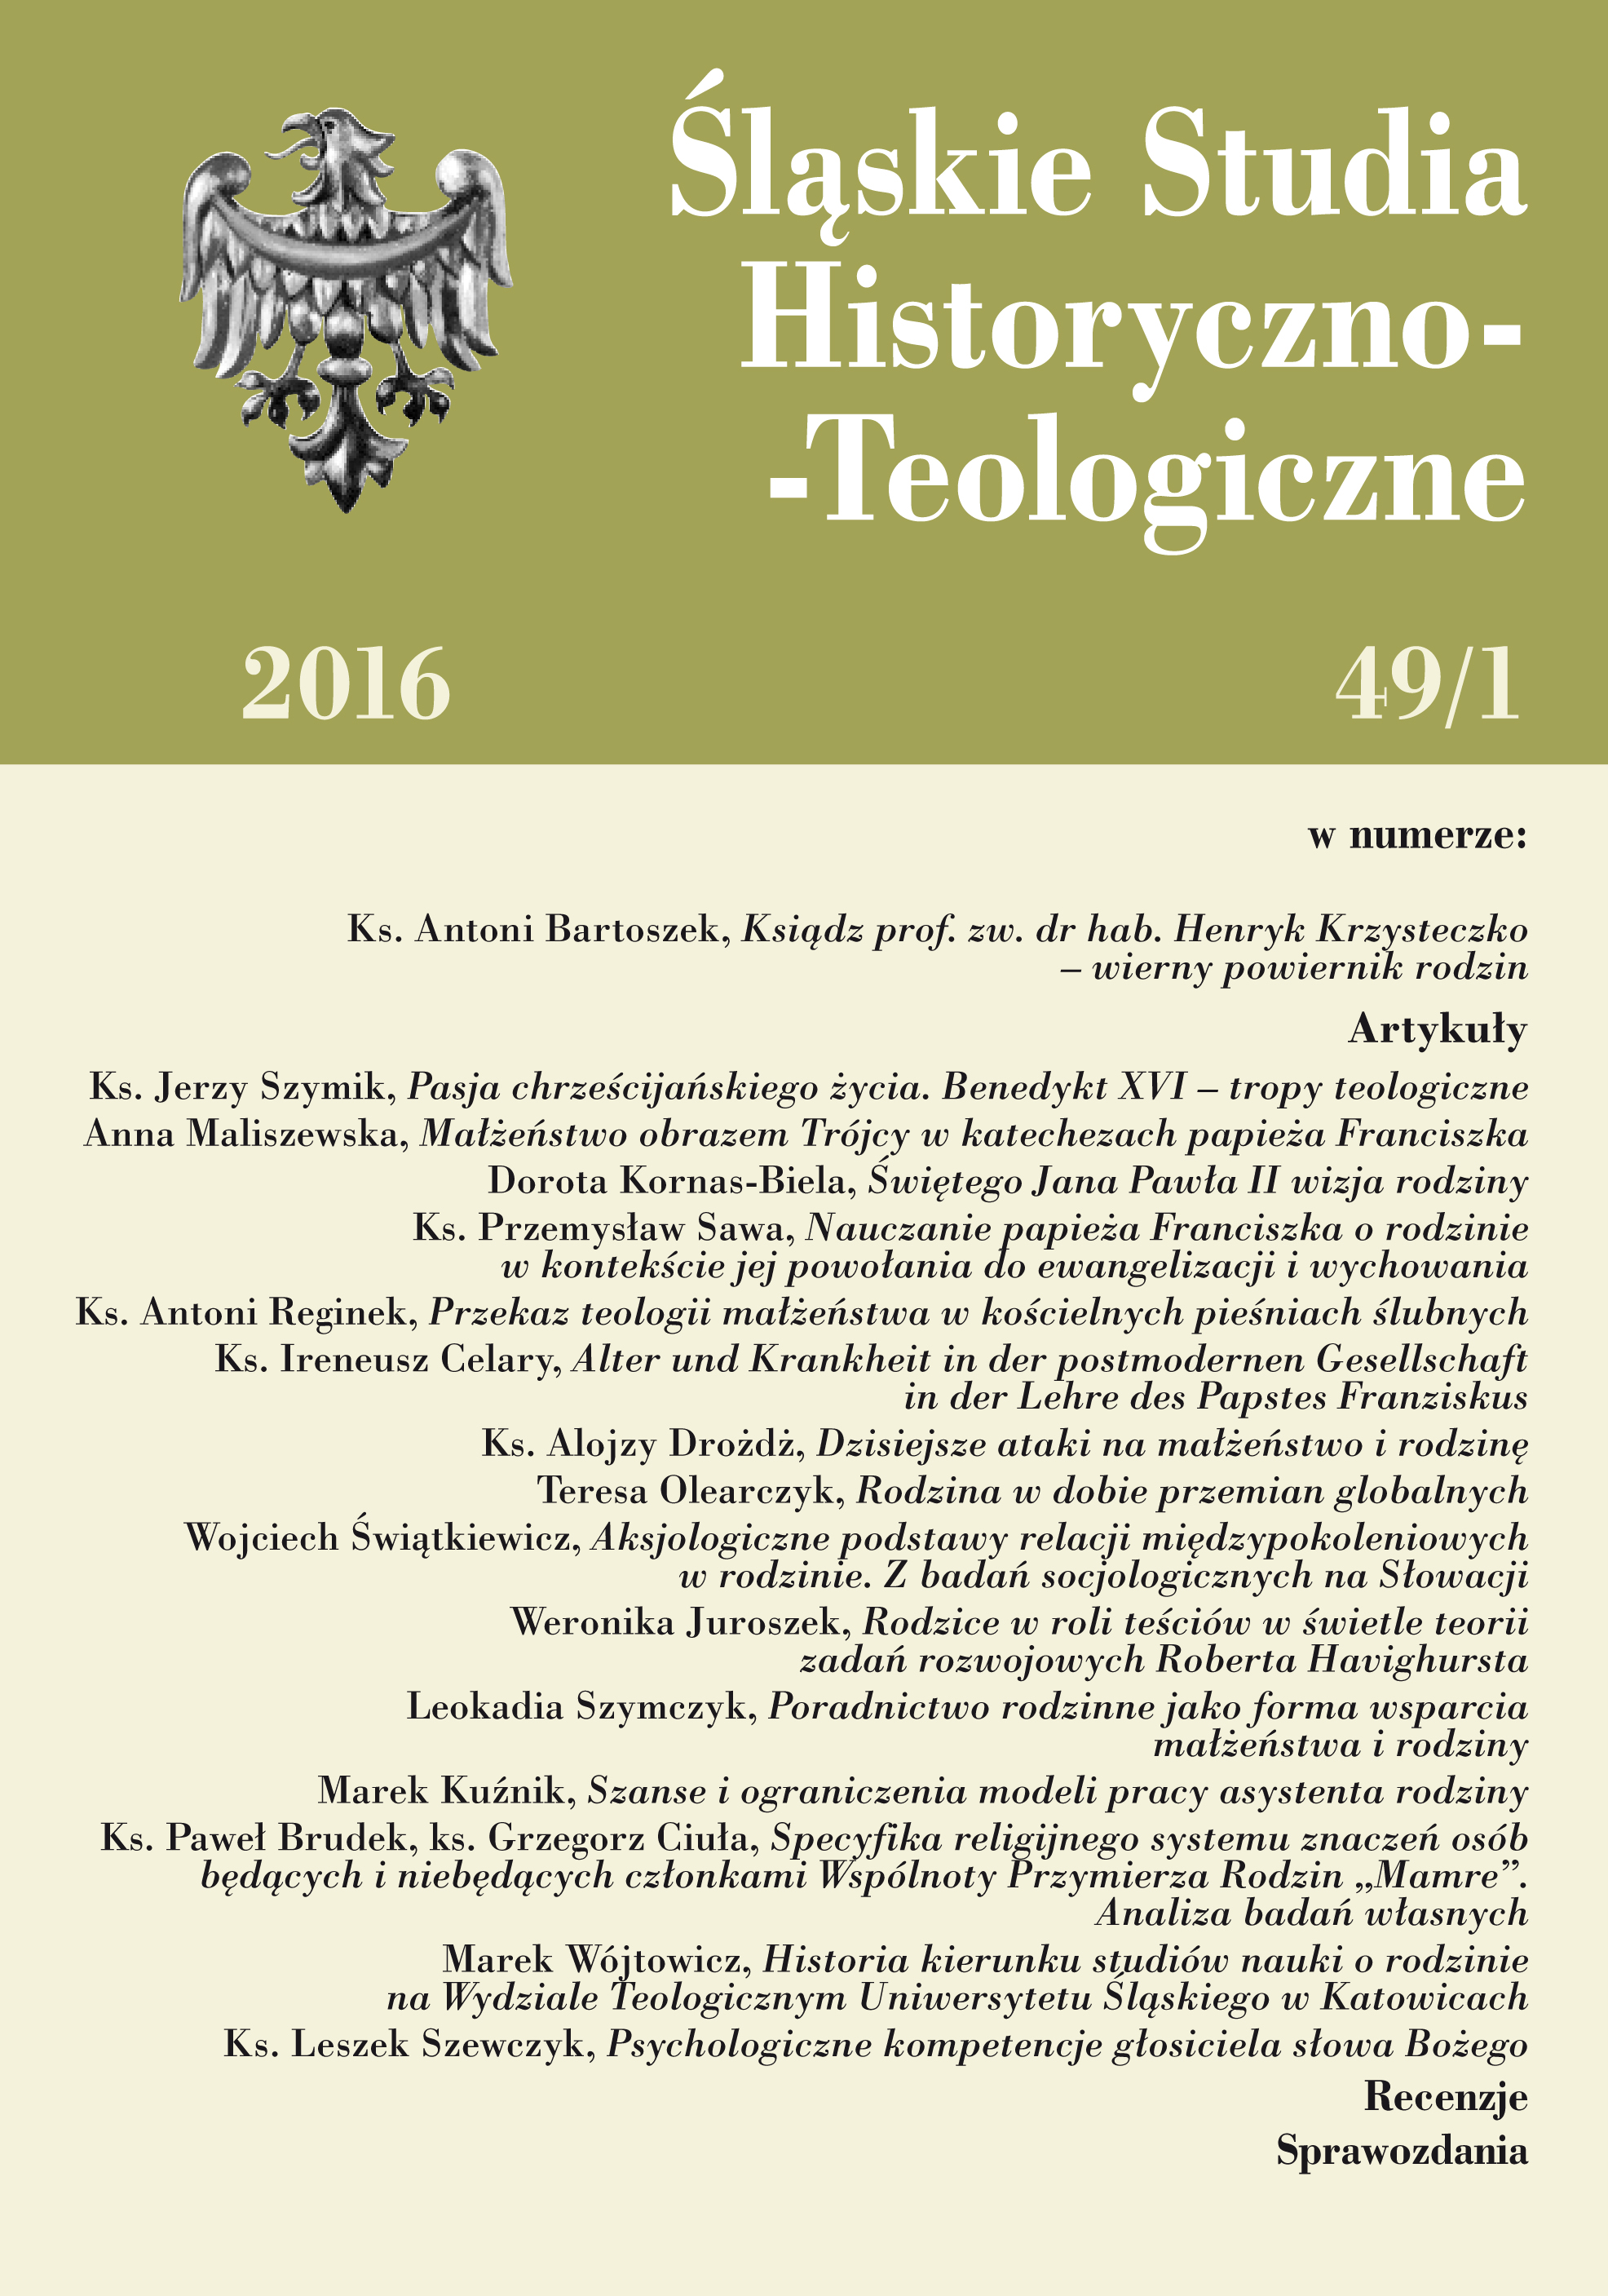 The History of Family Studies at the Faculty of Theology of the University of Silesia in Katowice Cover Image